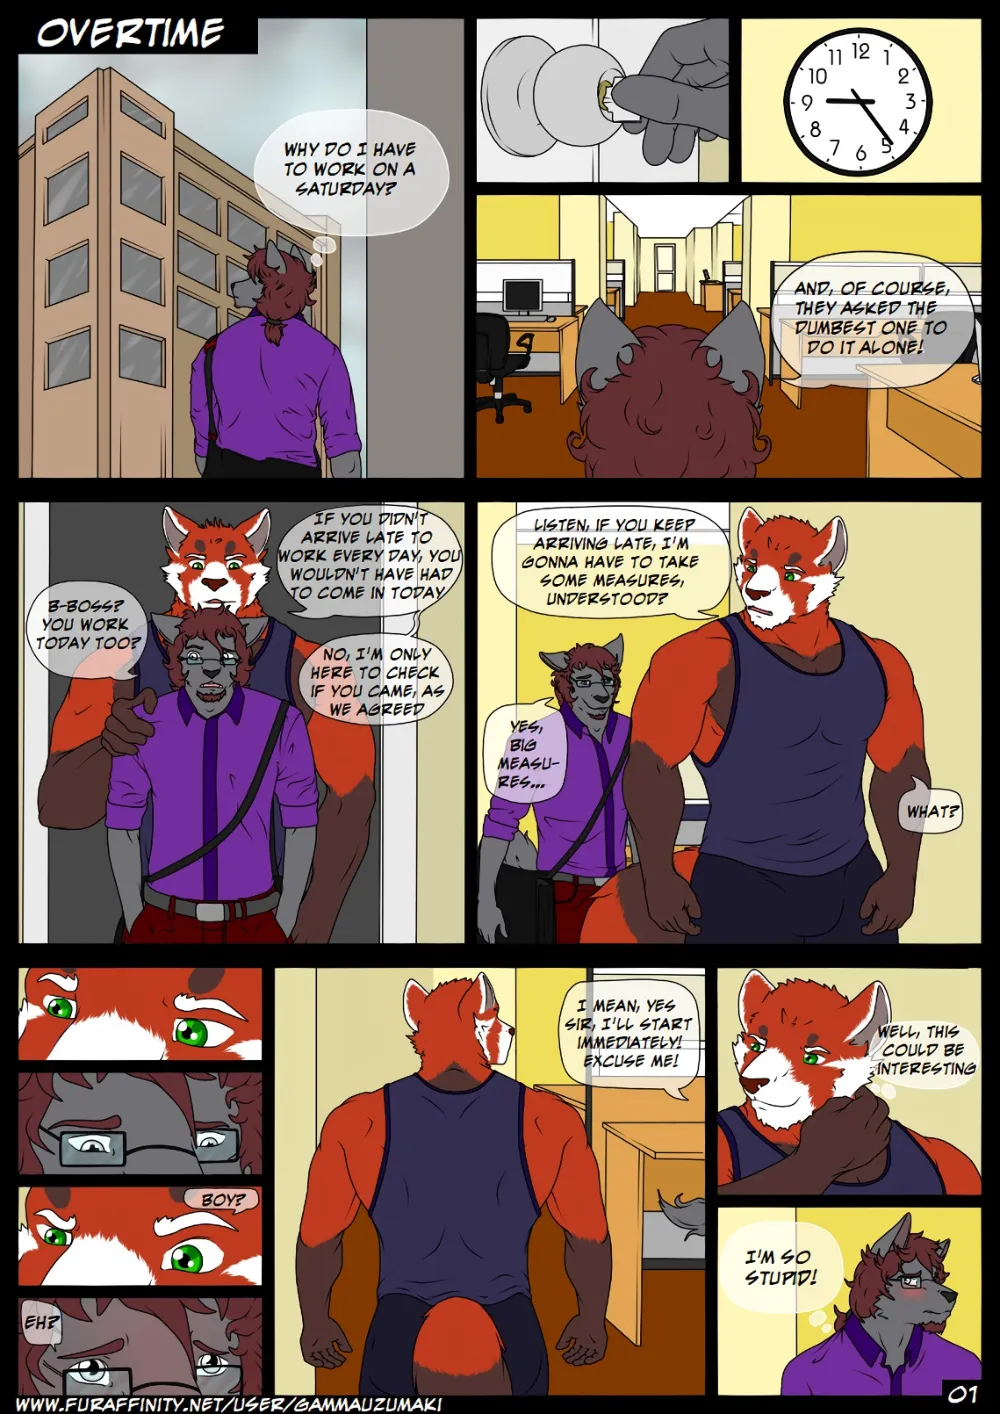 OVERTIME - Page 1